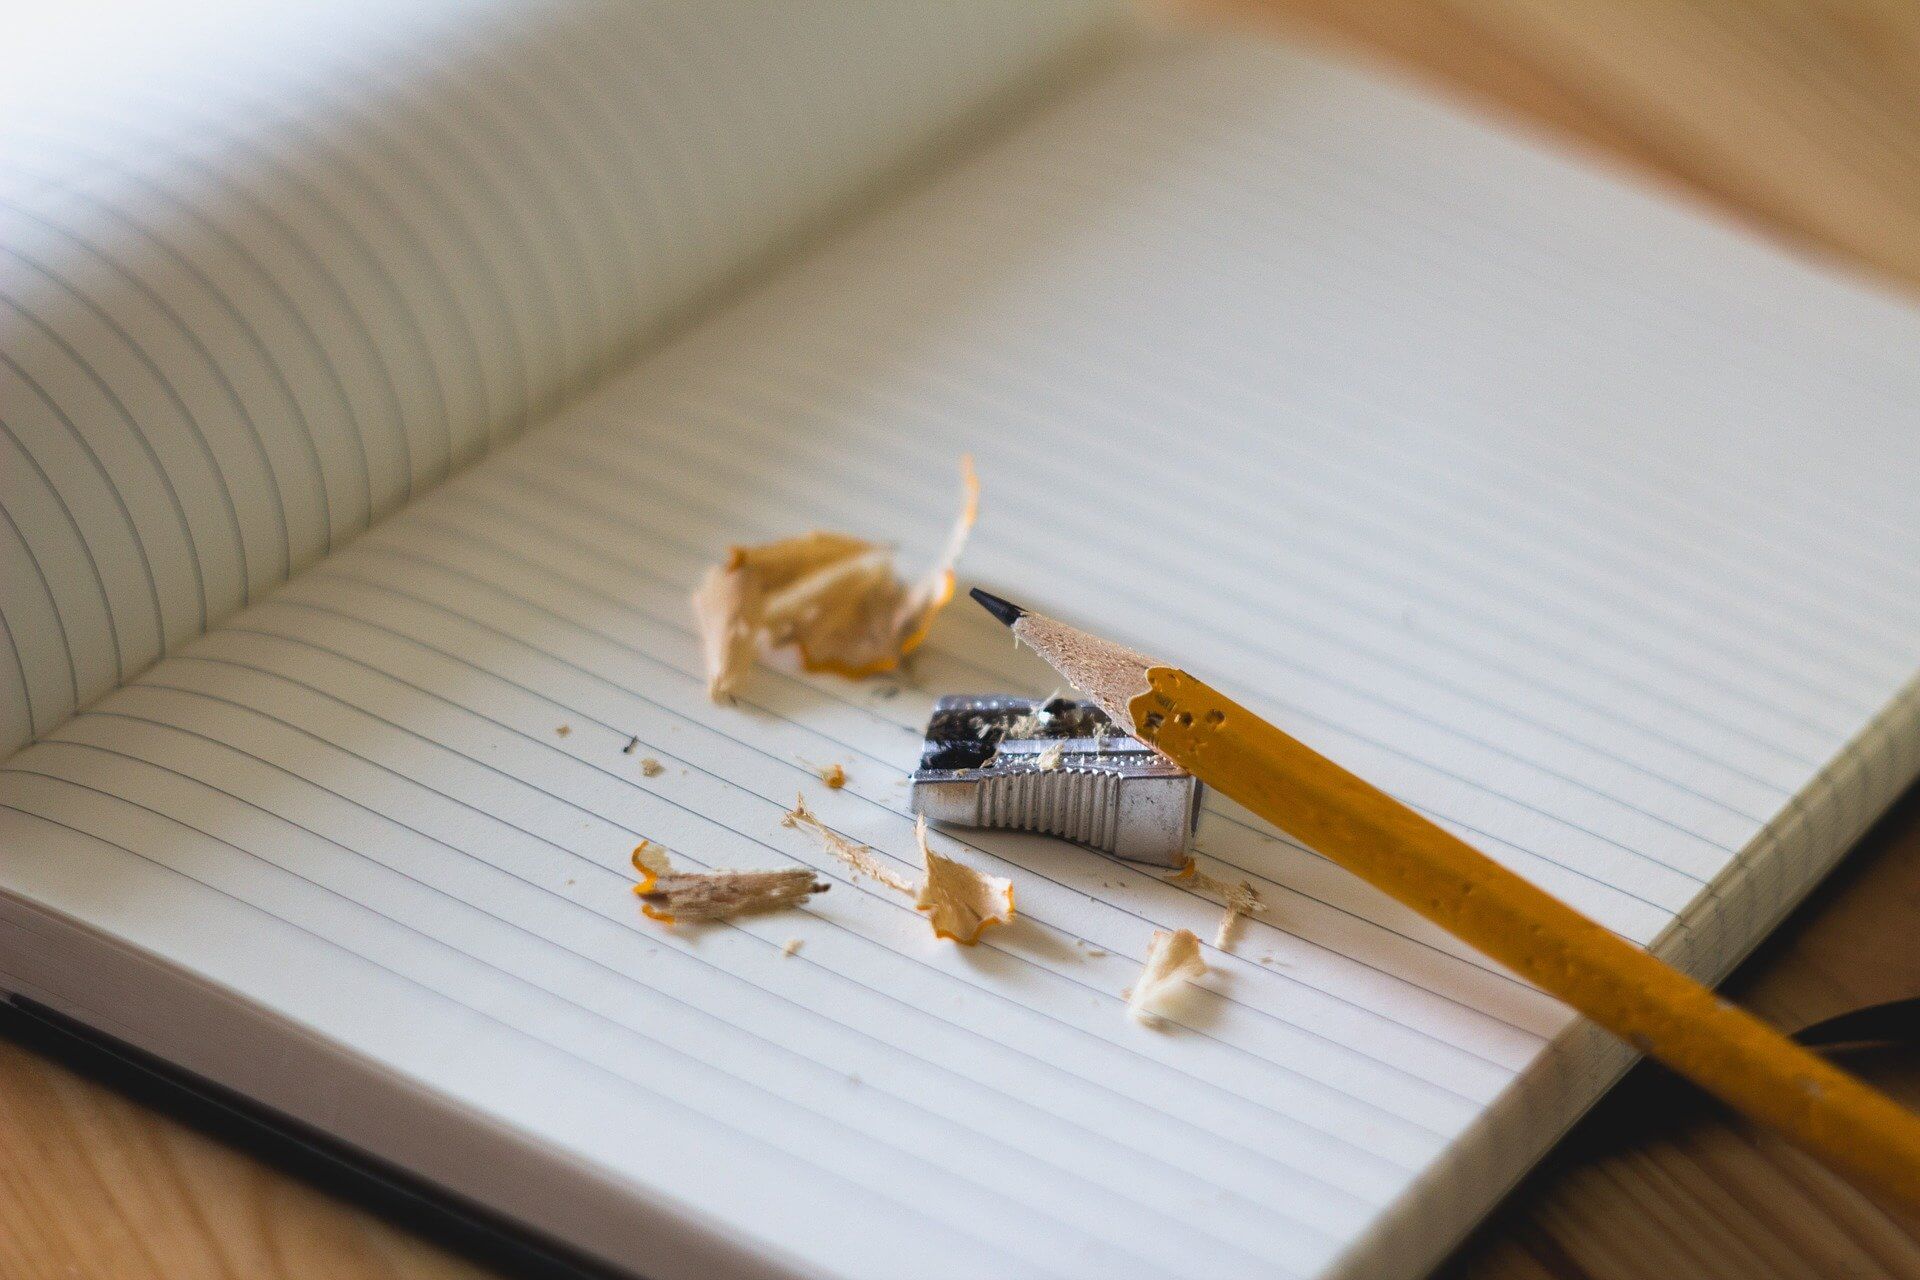 Why I Quit My Daily Writing Habit